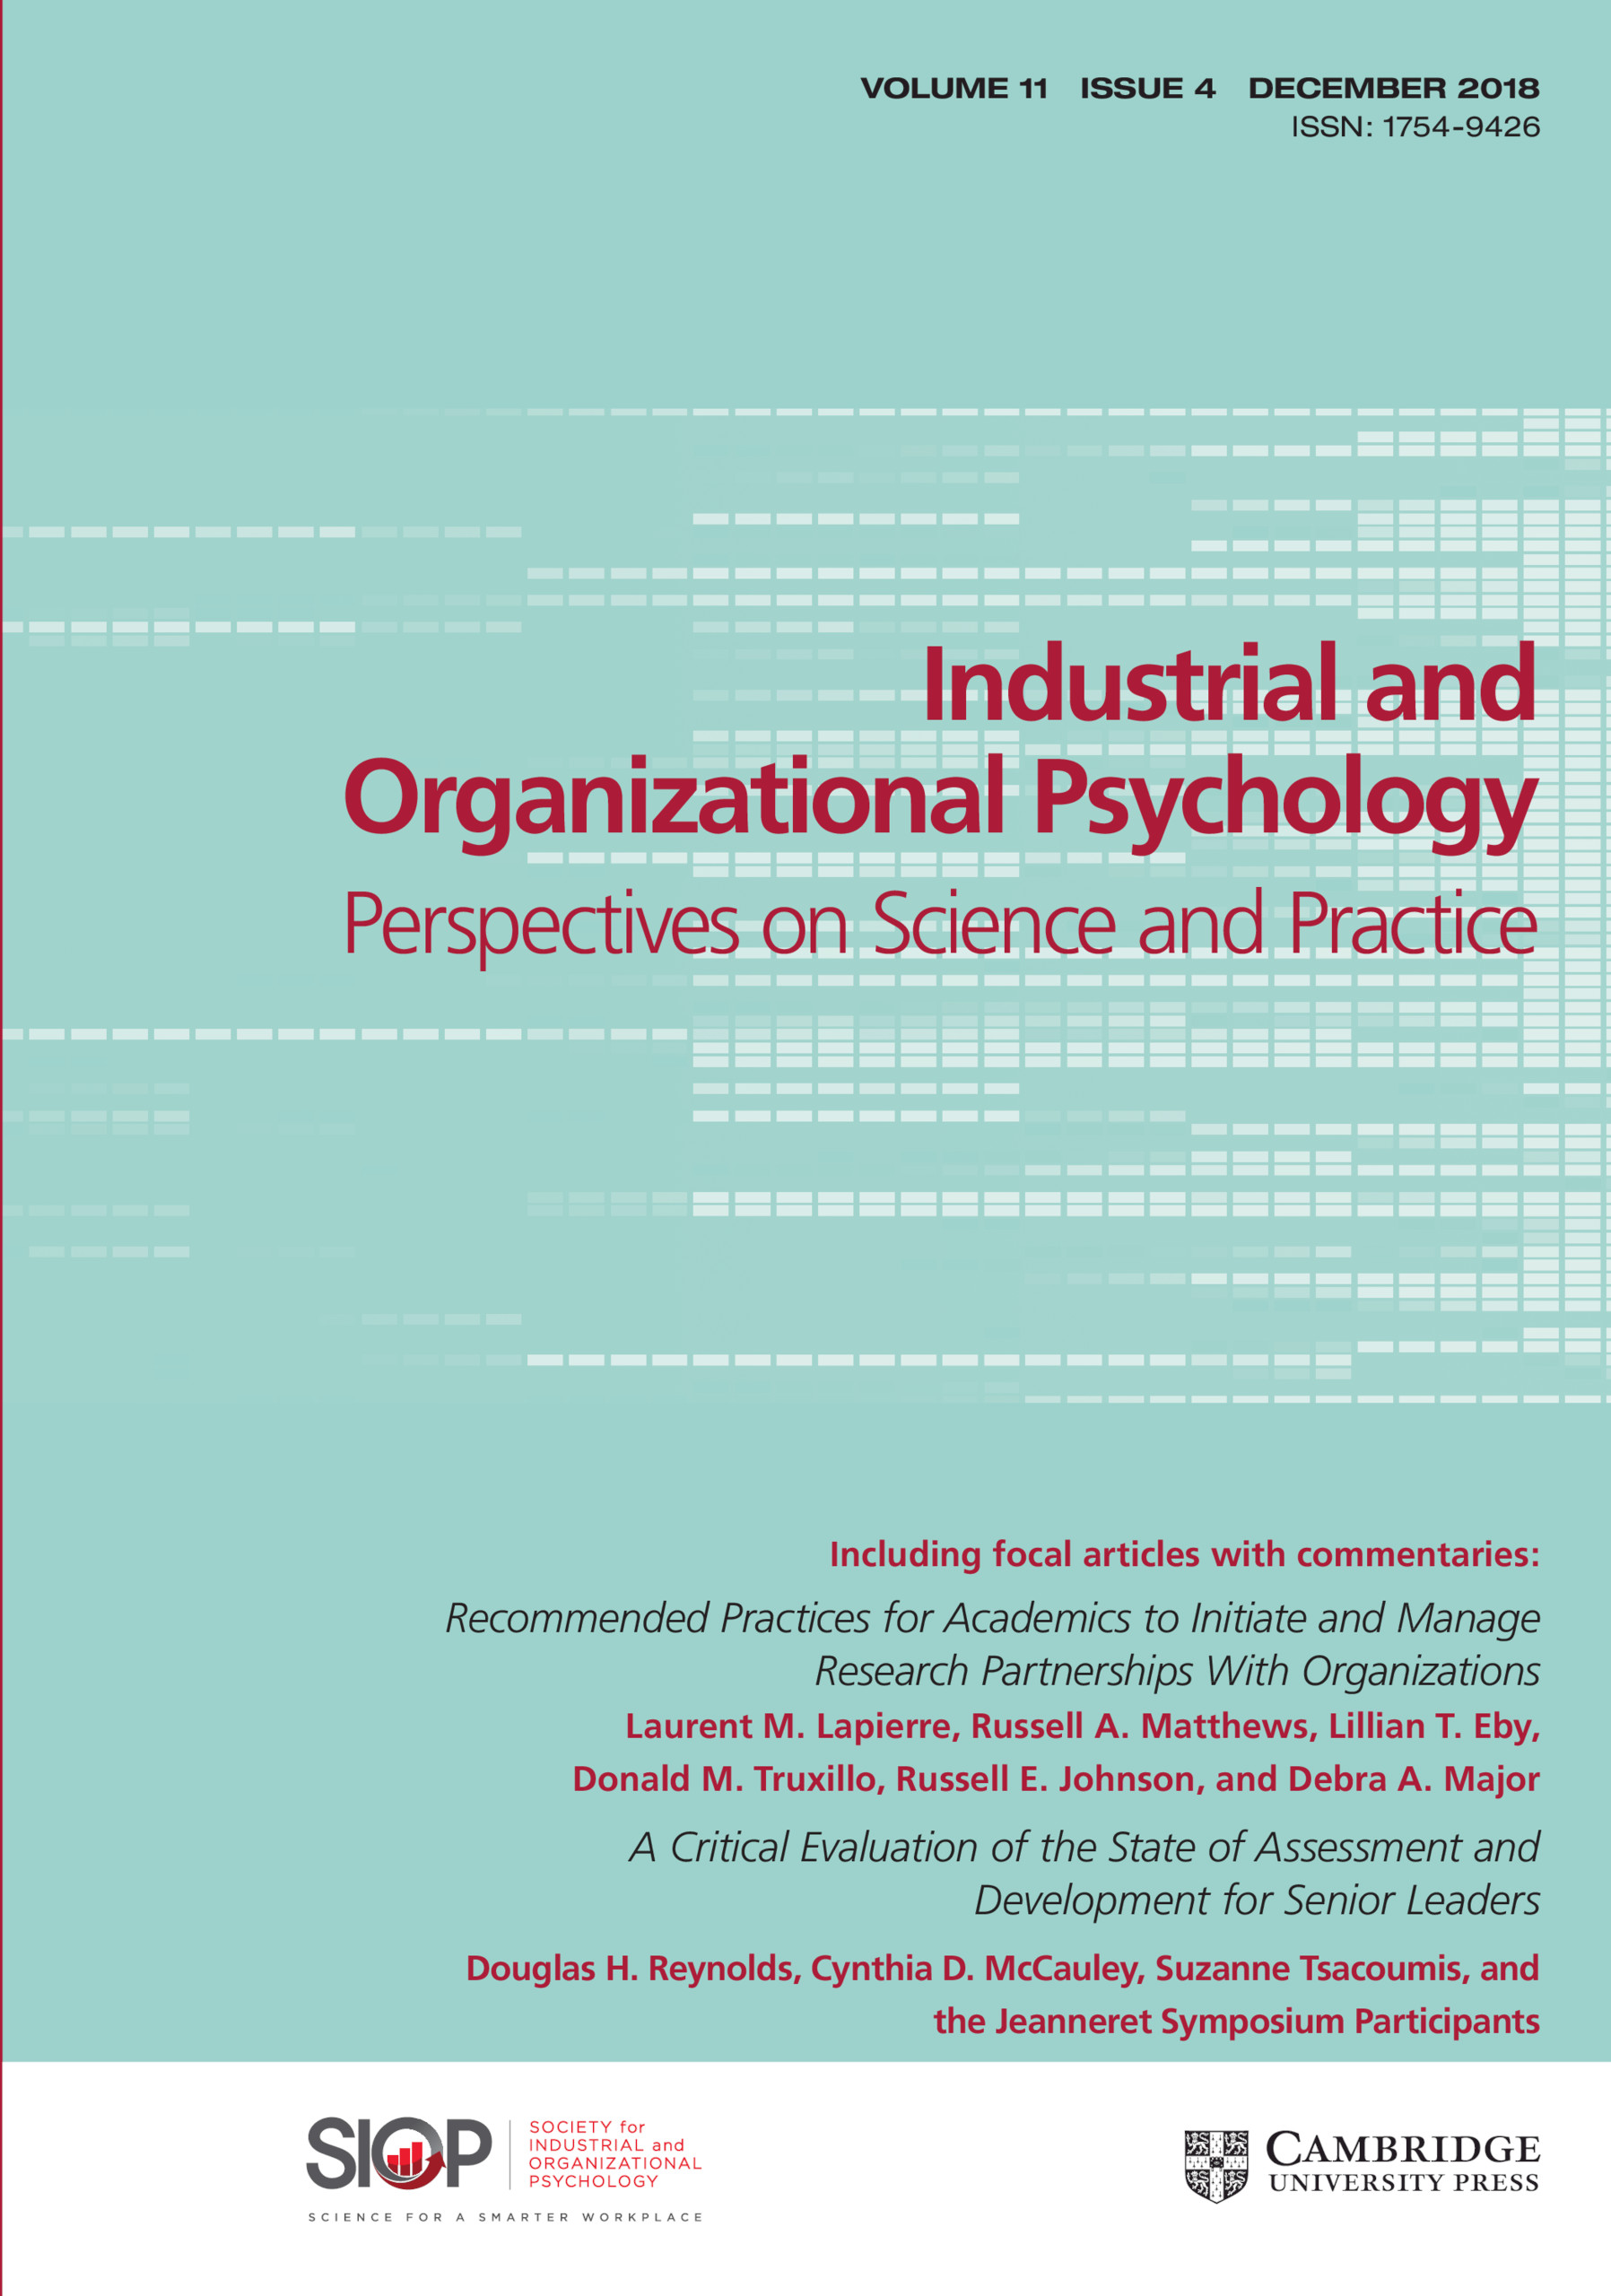 articles related to industrial organizational psychology